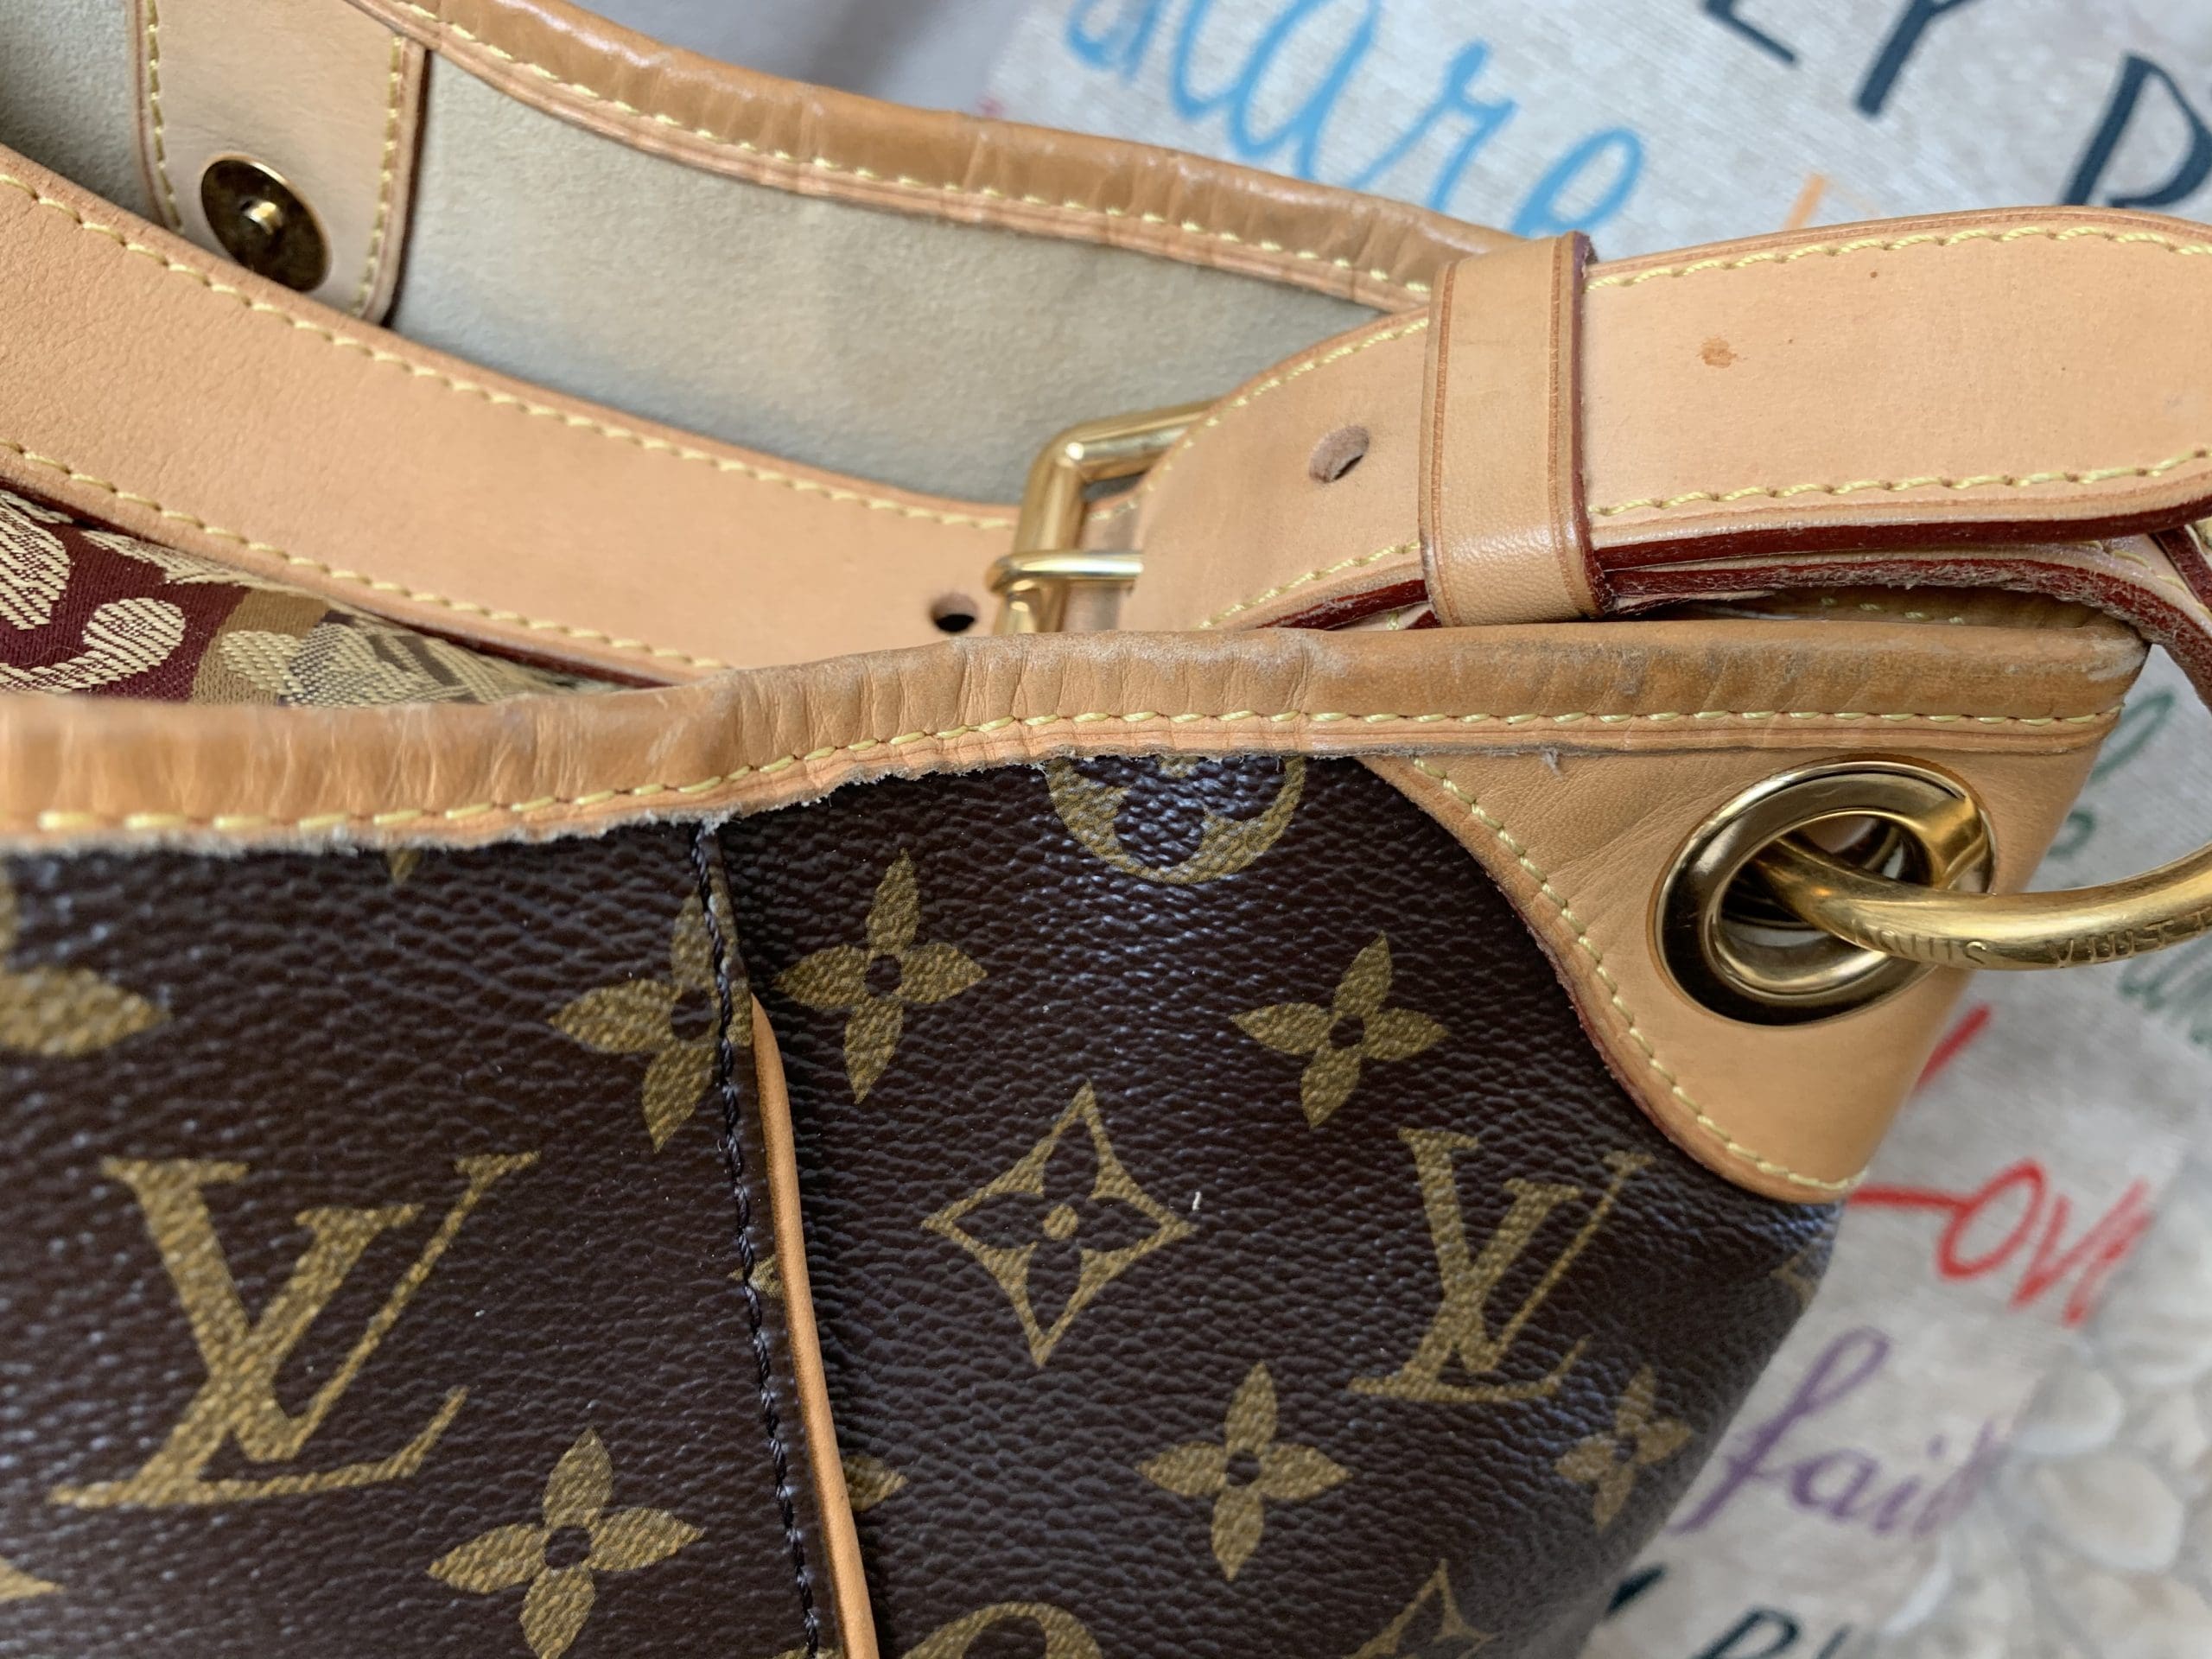 Louis Vuitton Turenne GM JUST IN! Call/text us at ***-***-**** if